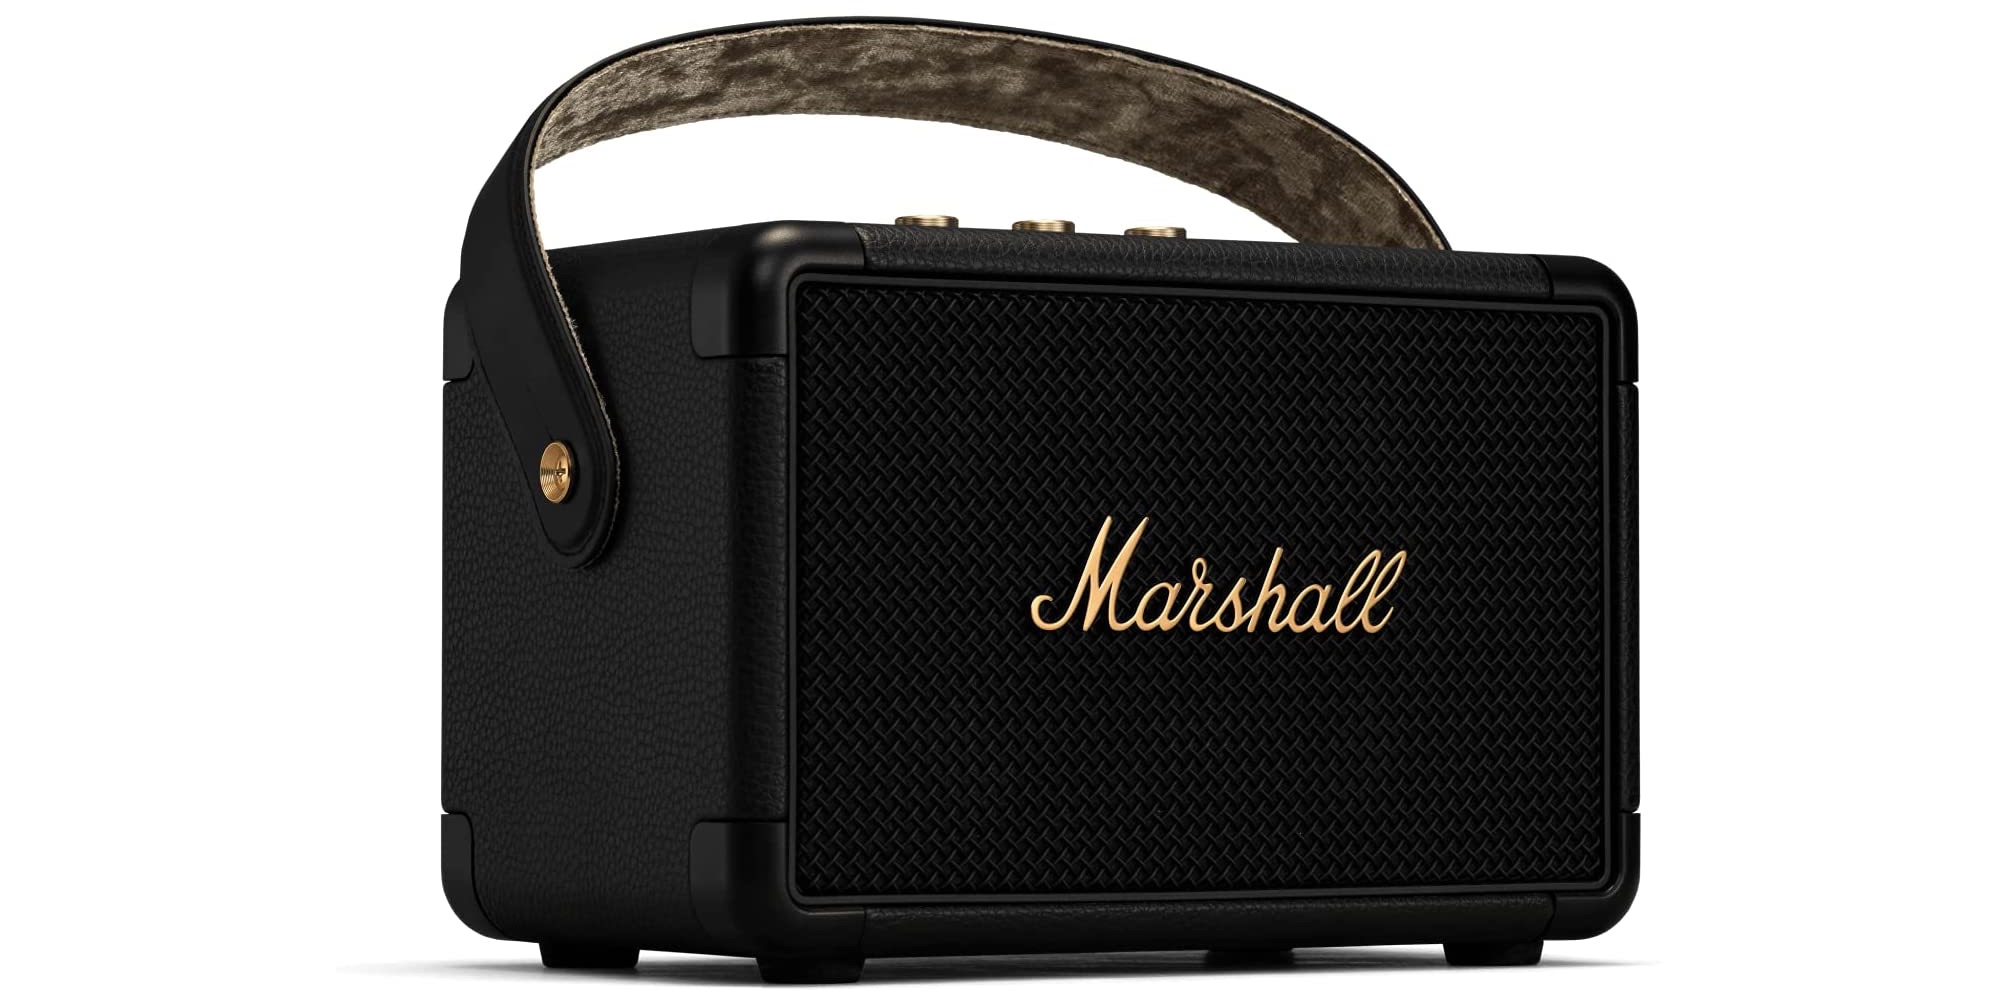 Marshall\'s popular vinyl-wrapped portable Bluetooth speakers on sale from  $130